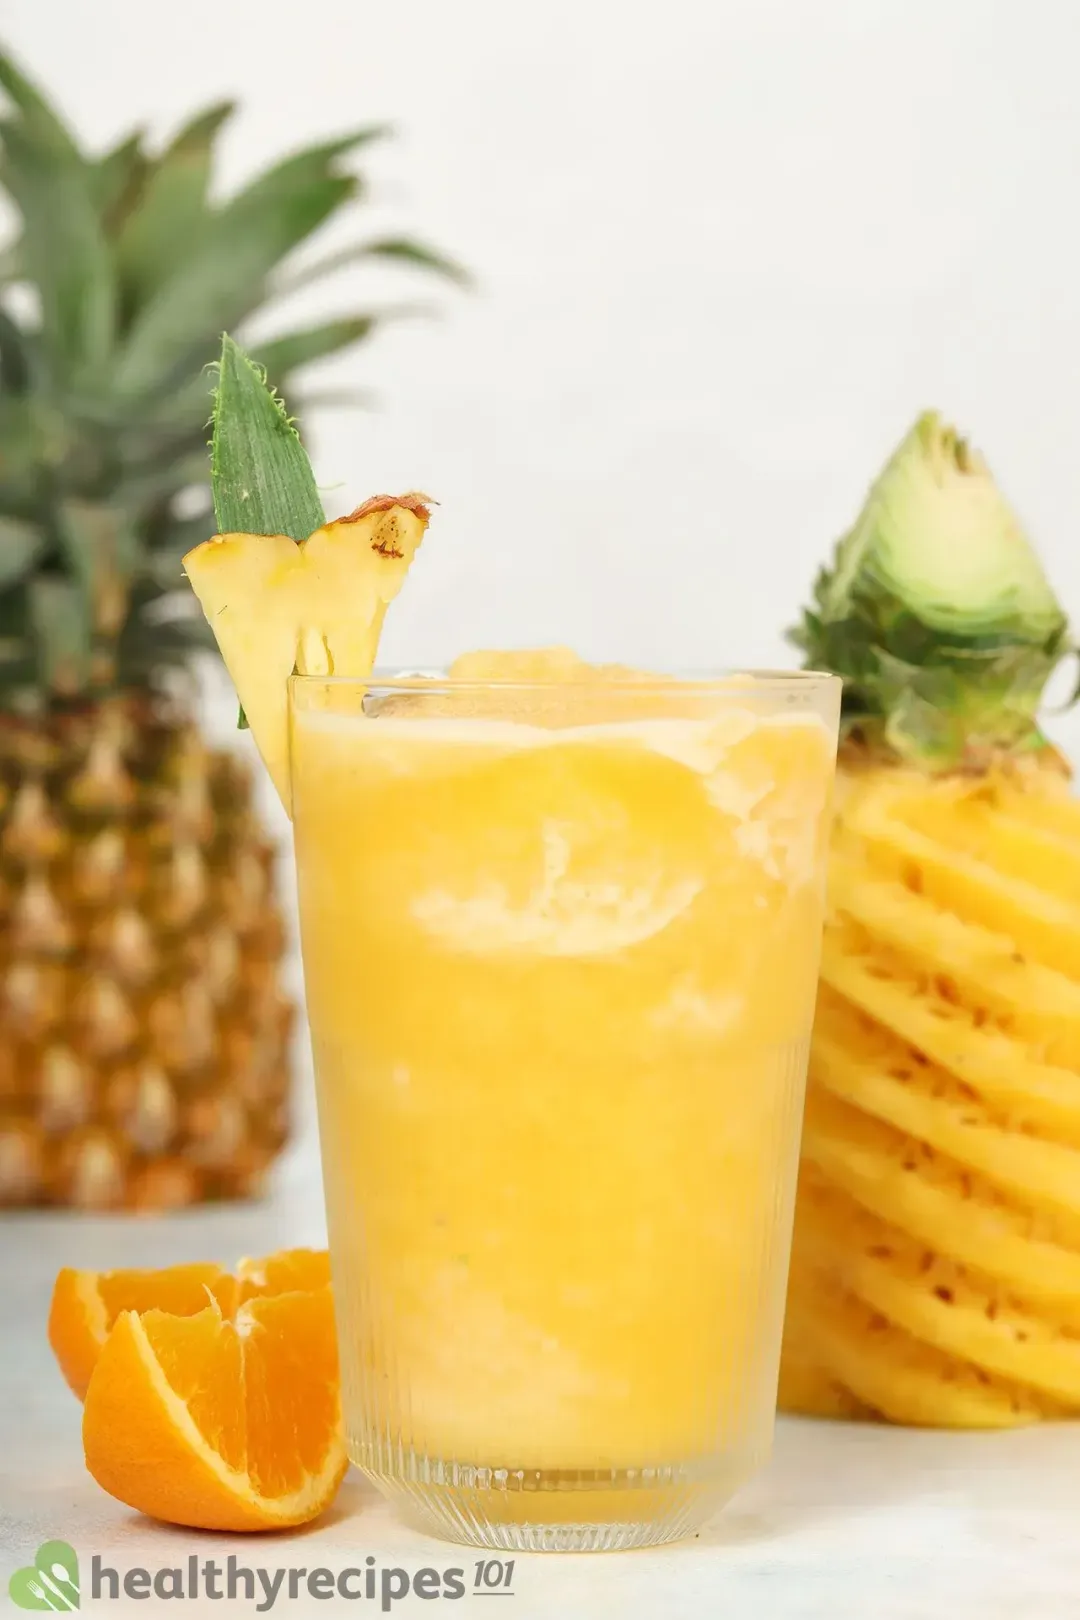 Is This Pineapple Ginger Smoothie Healthy